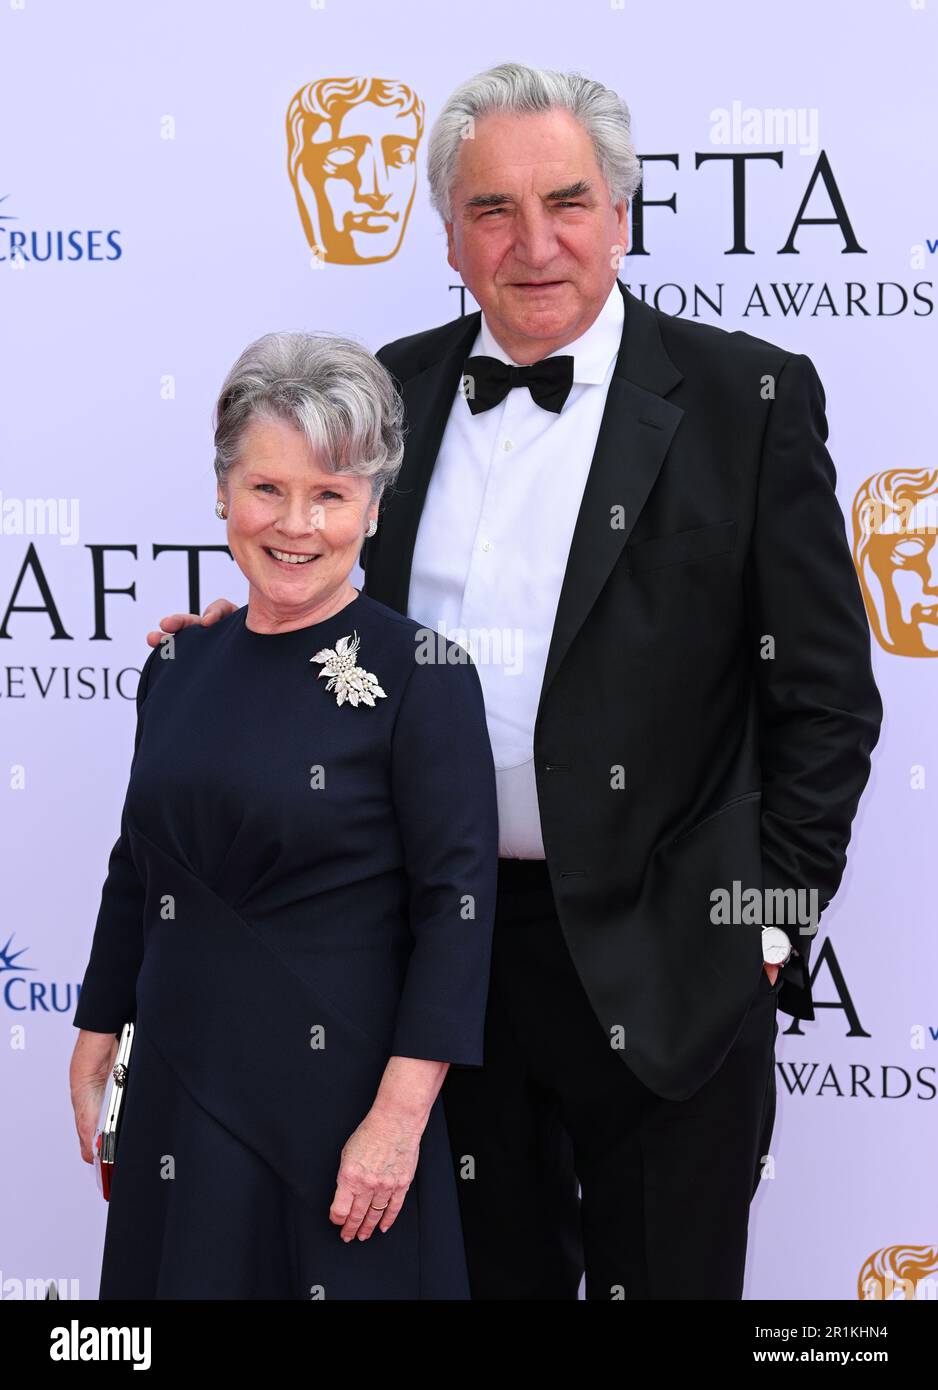 London, UK. 14th May, 2023. London, UK. May 14th, 2023. Imelda Staunton and Jim Carter arriving at the BAFTA Television Awards with P&O Cruises, the Royal Festival Hall, London. Credit: Doug Peters/Alamy Live News Stock Photo